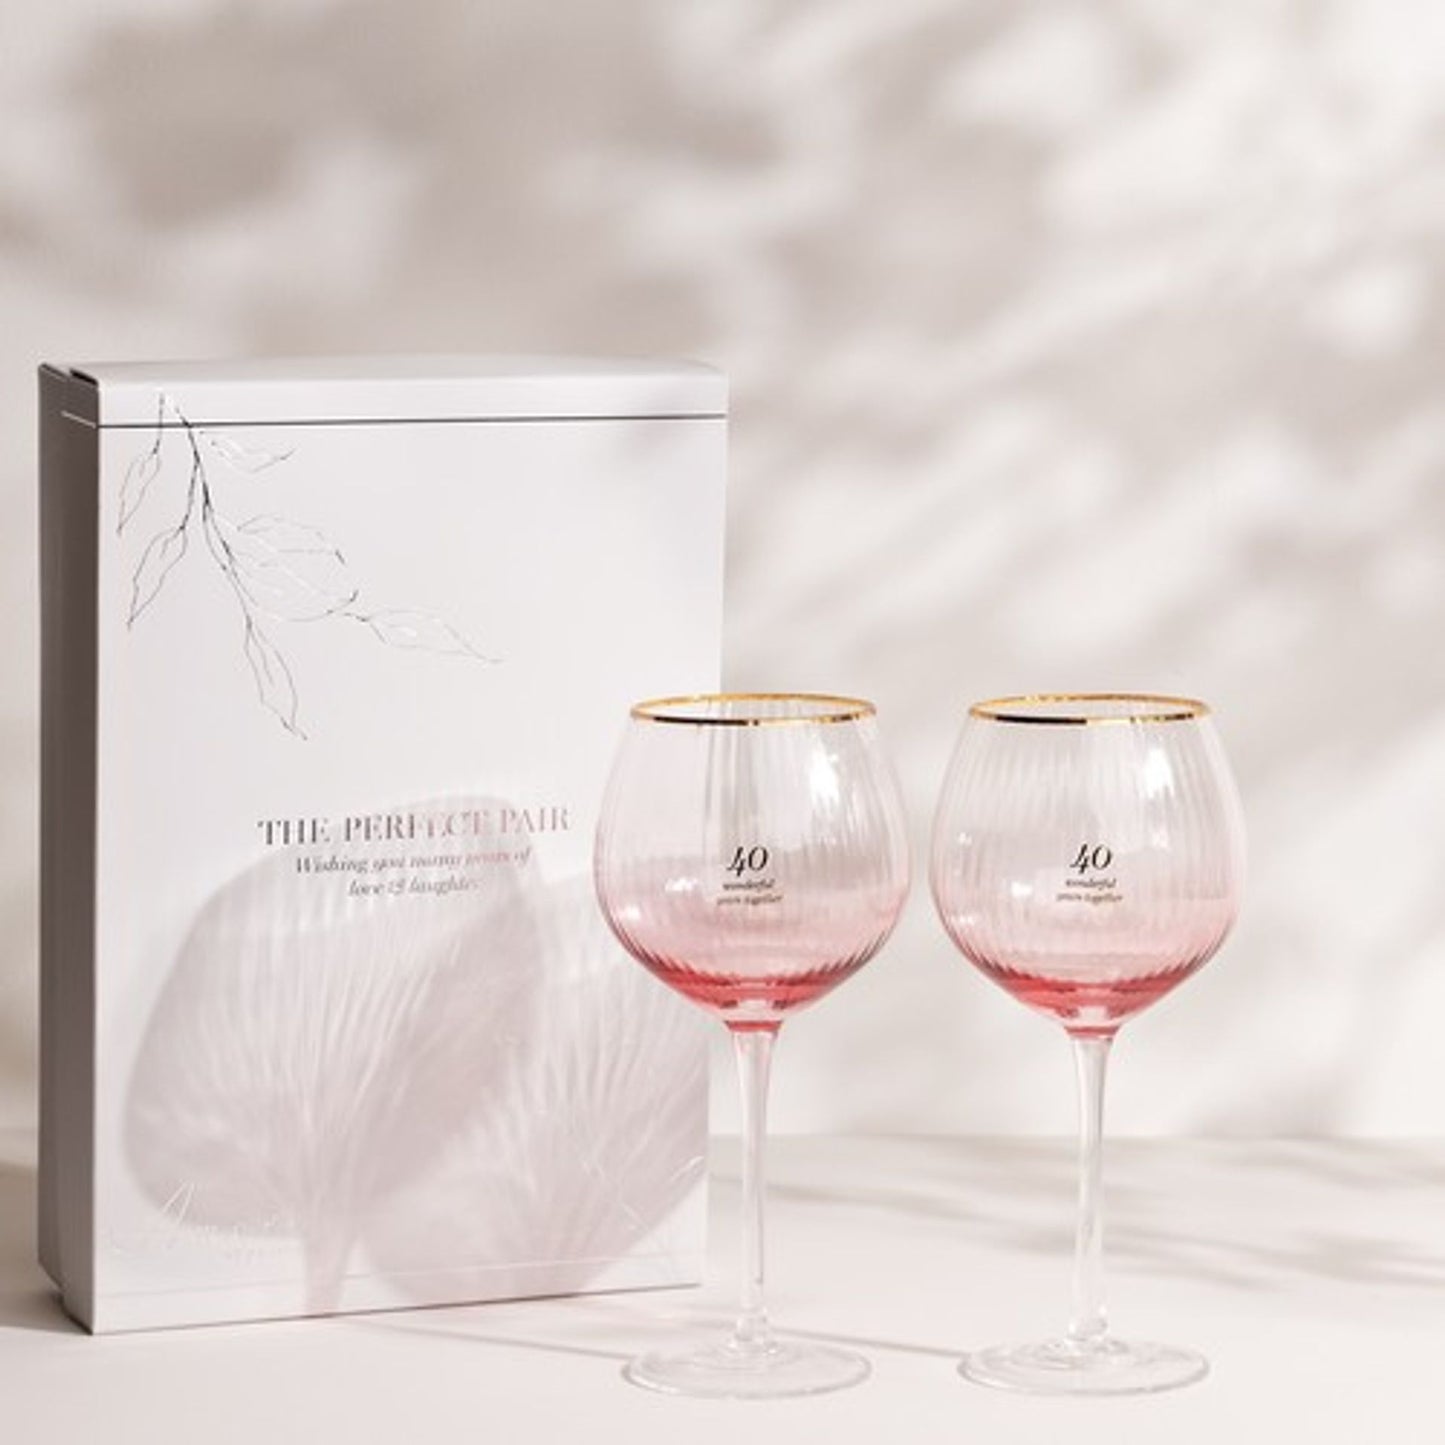 Amore Gin Glasses Set of 2 - 40th Anniversary - Pink